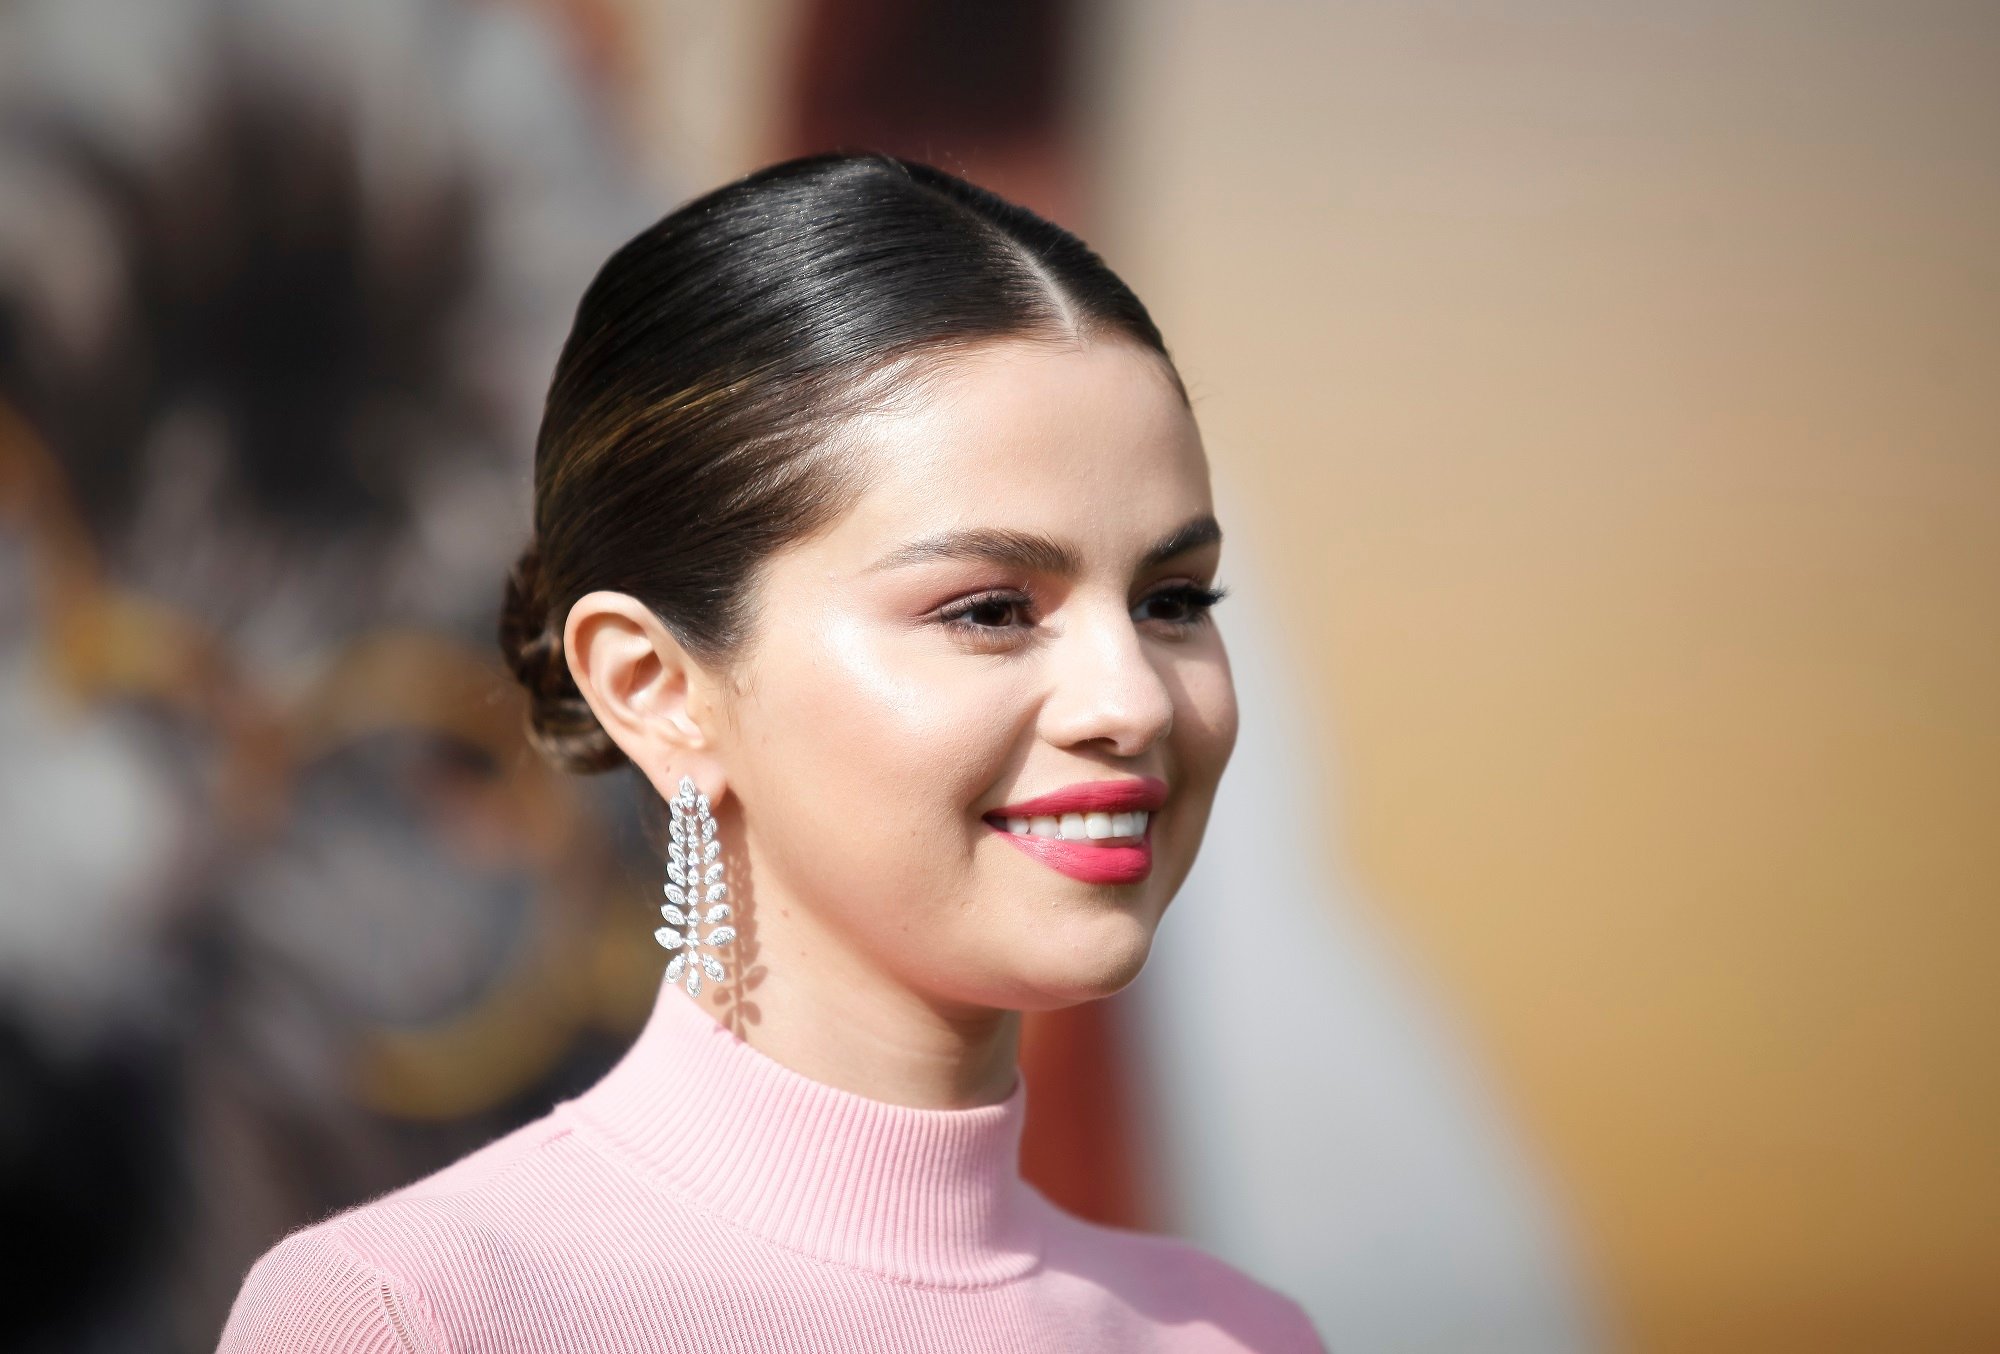 Selena Gomez attends the premiere of Universal Pictures' 'Dolittle' on January 11, 2020